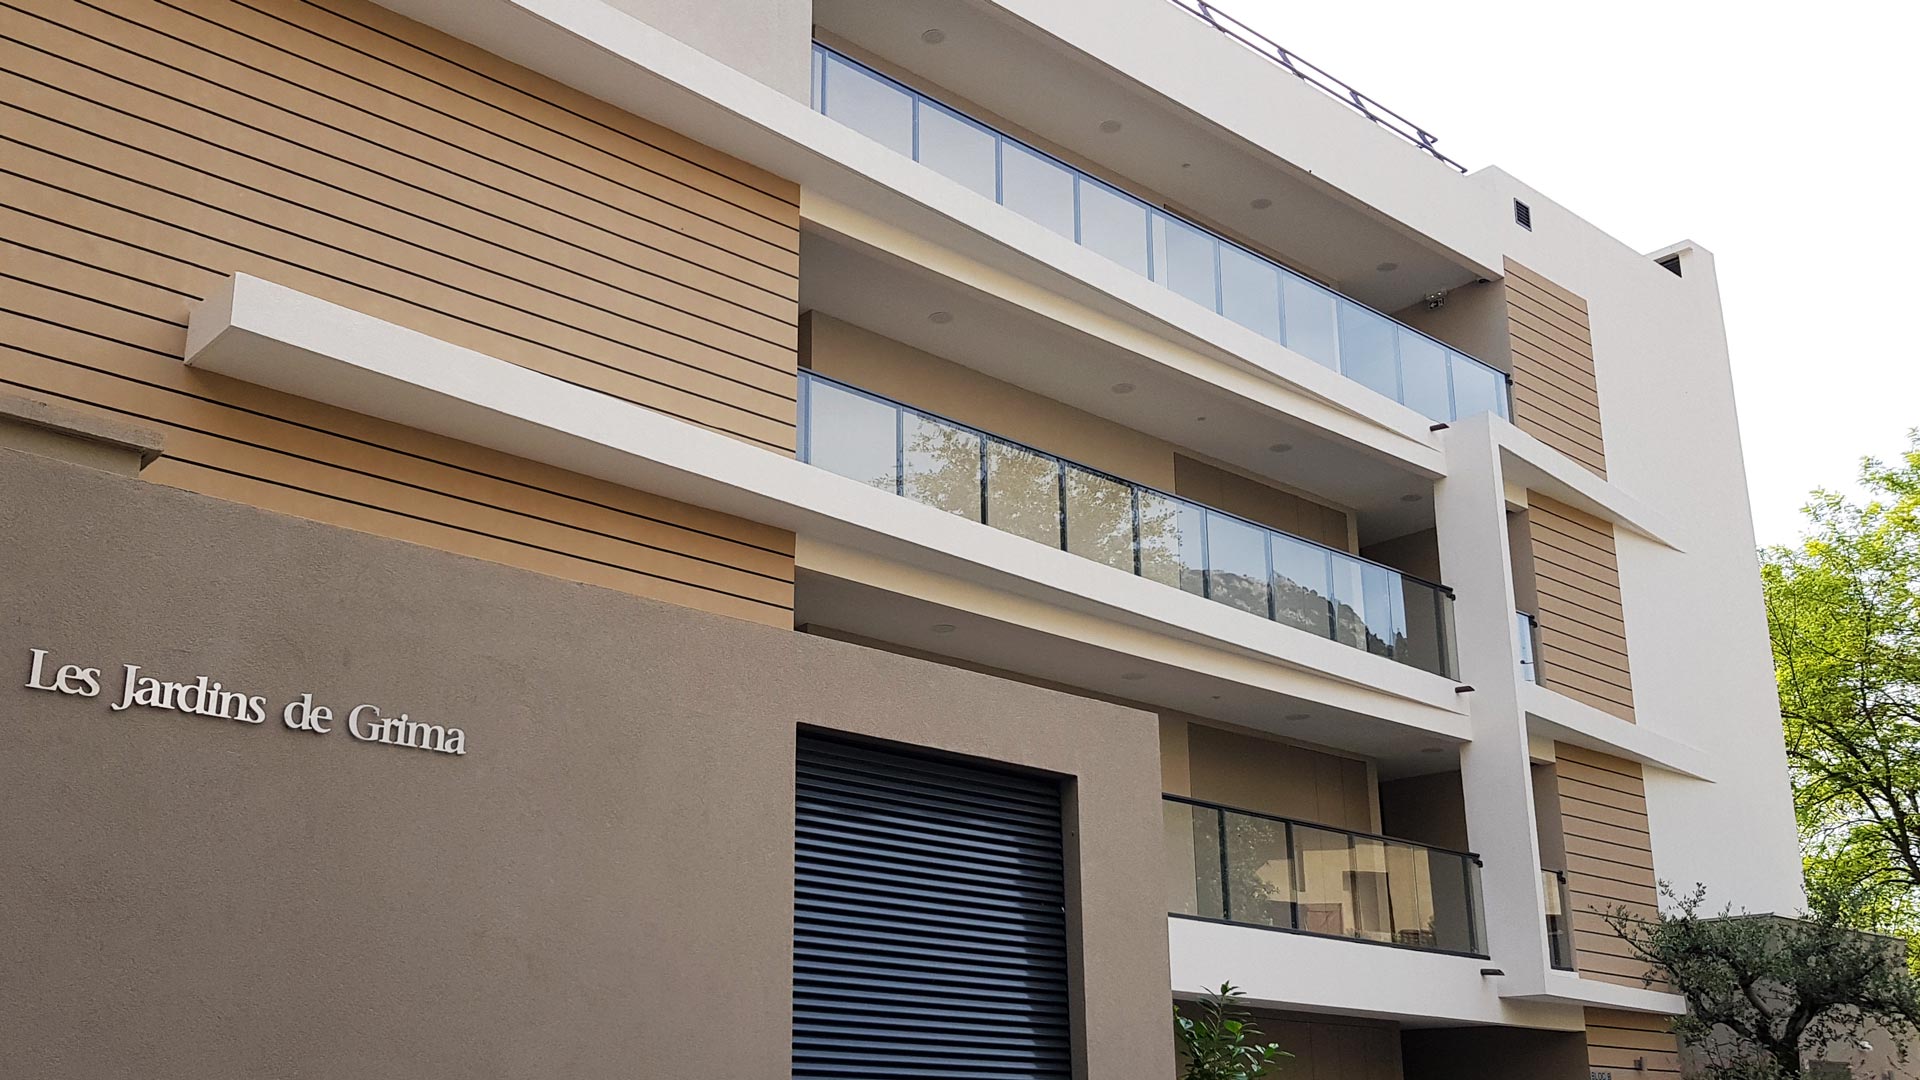 RIPO aluminium railings, framless balustrades, partition walls and blinds in French apartment buildings.